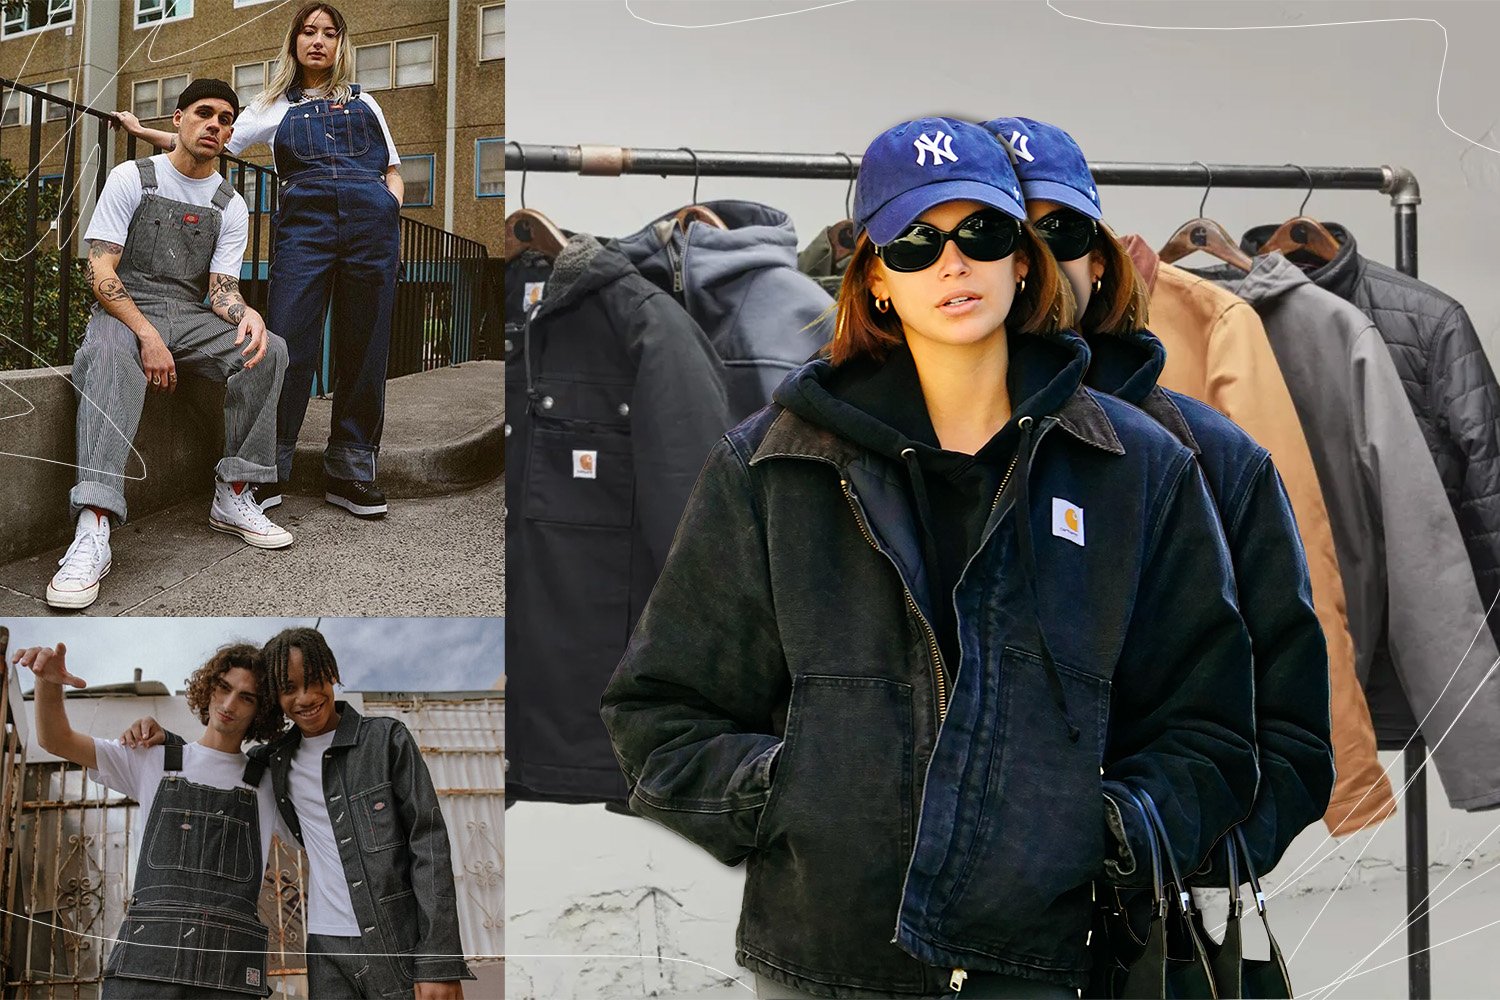 How Carhartt WIP became a subcultural phenomenon